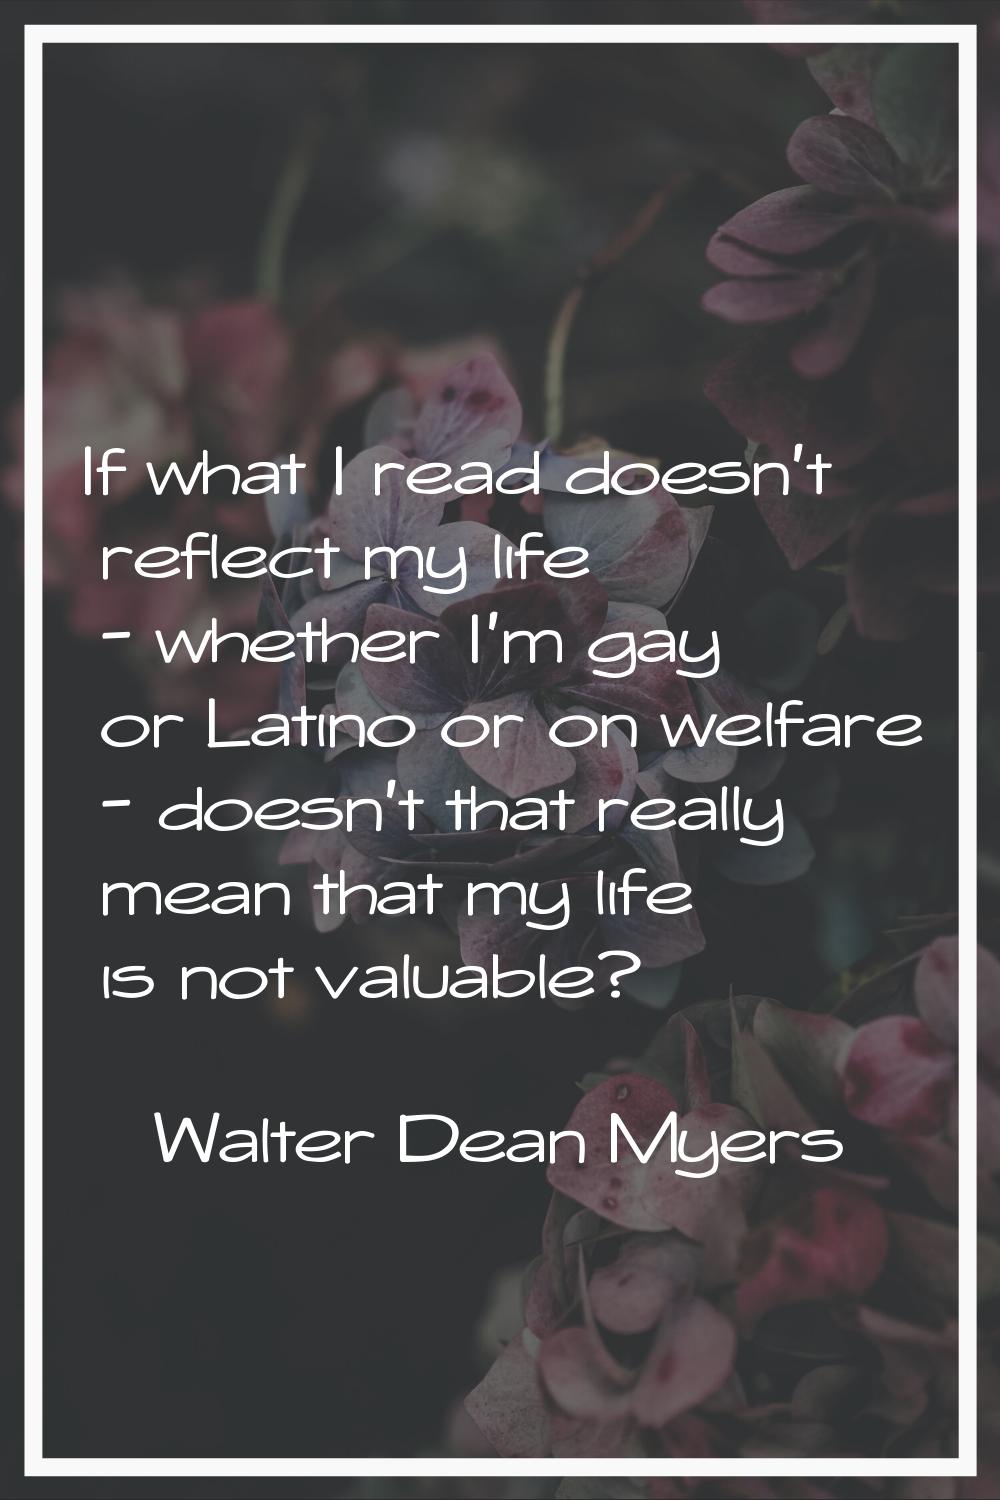 If what I read doesn't reflect my life - whether I'm gay or Latino or on welfare - doesn't that rea